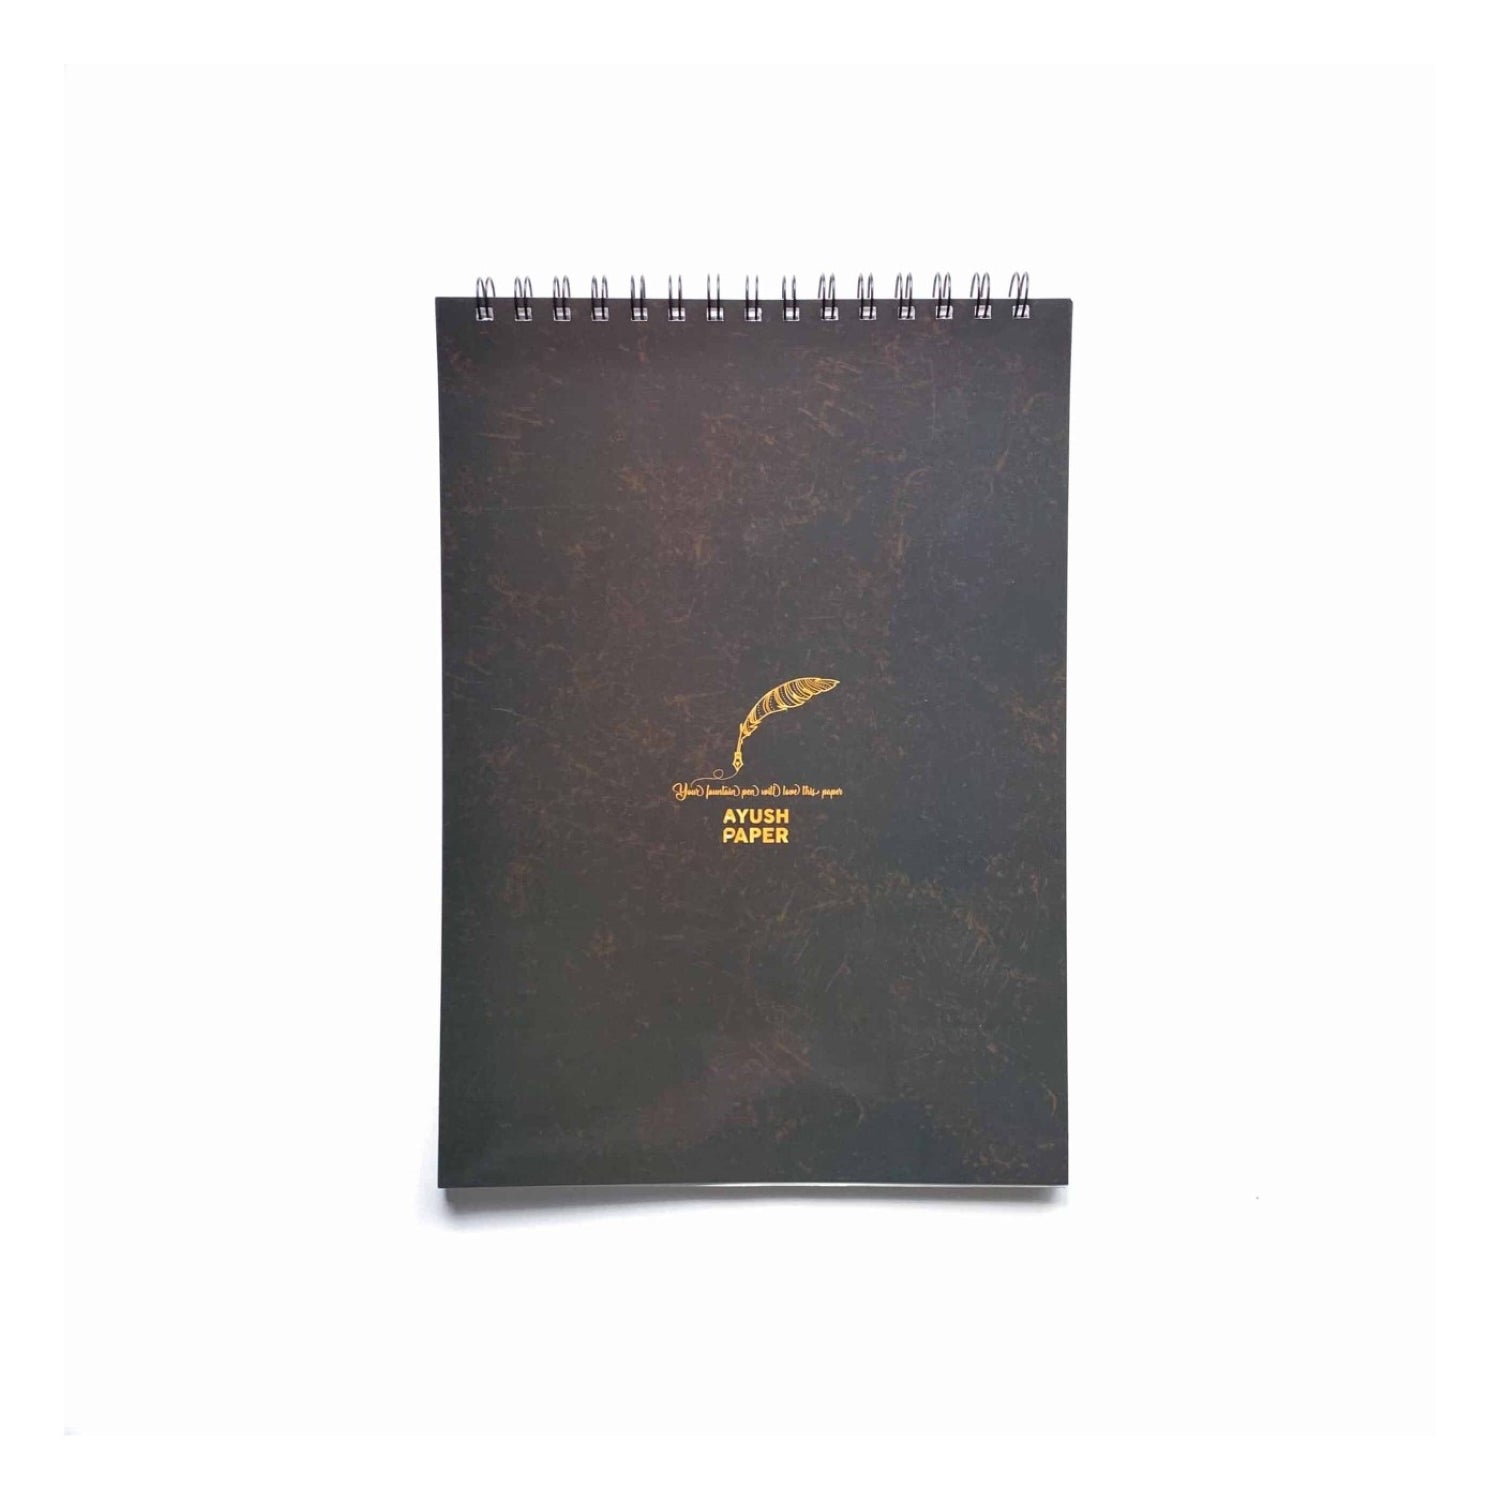 Ayush Notepad A5 - Lined